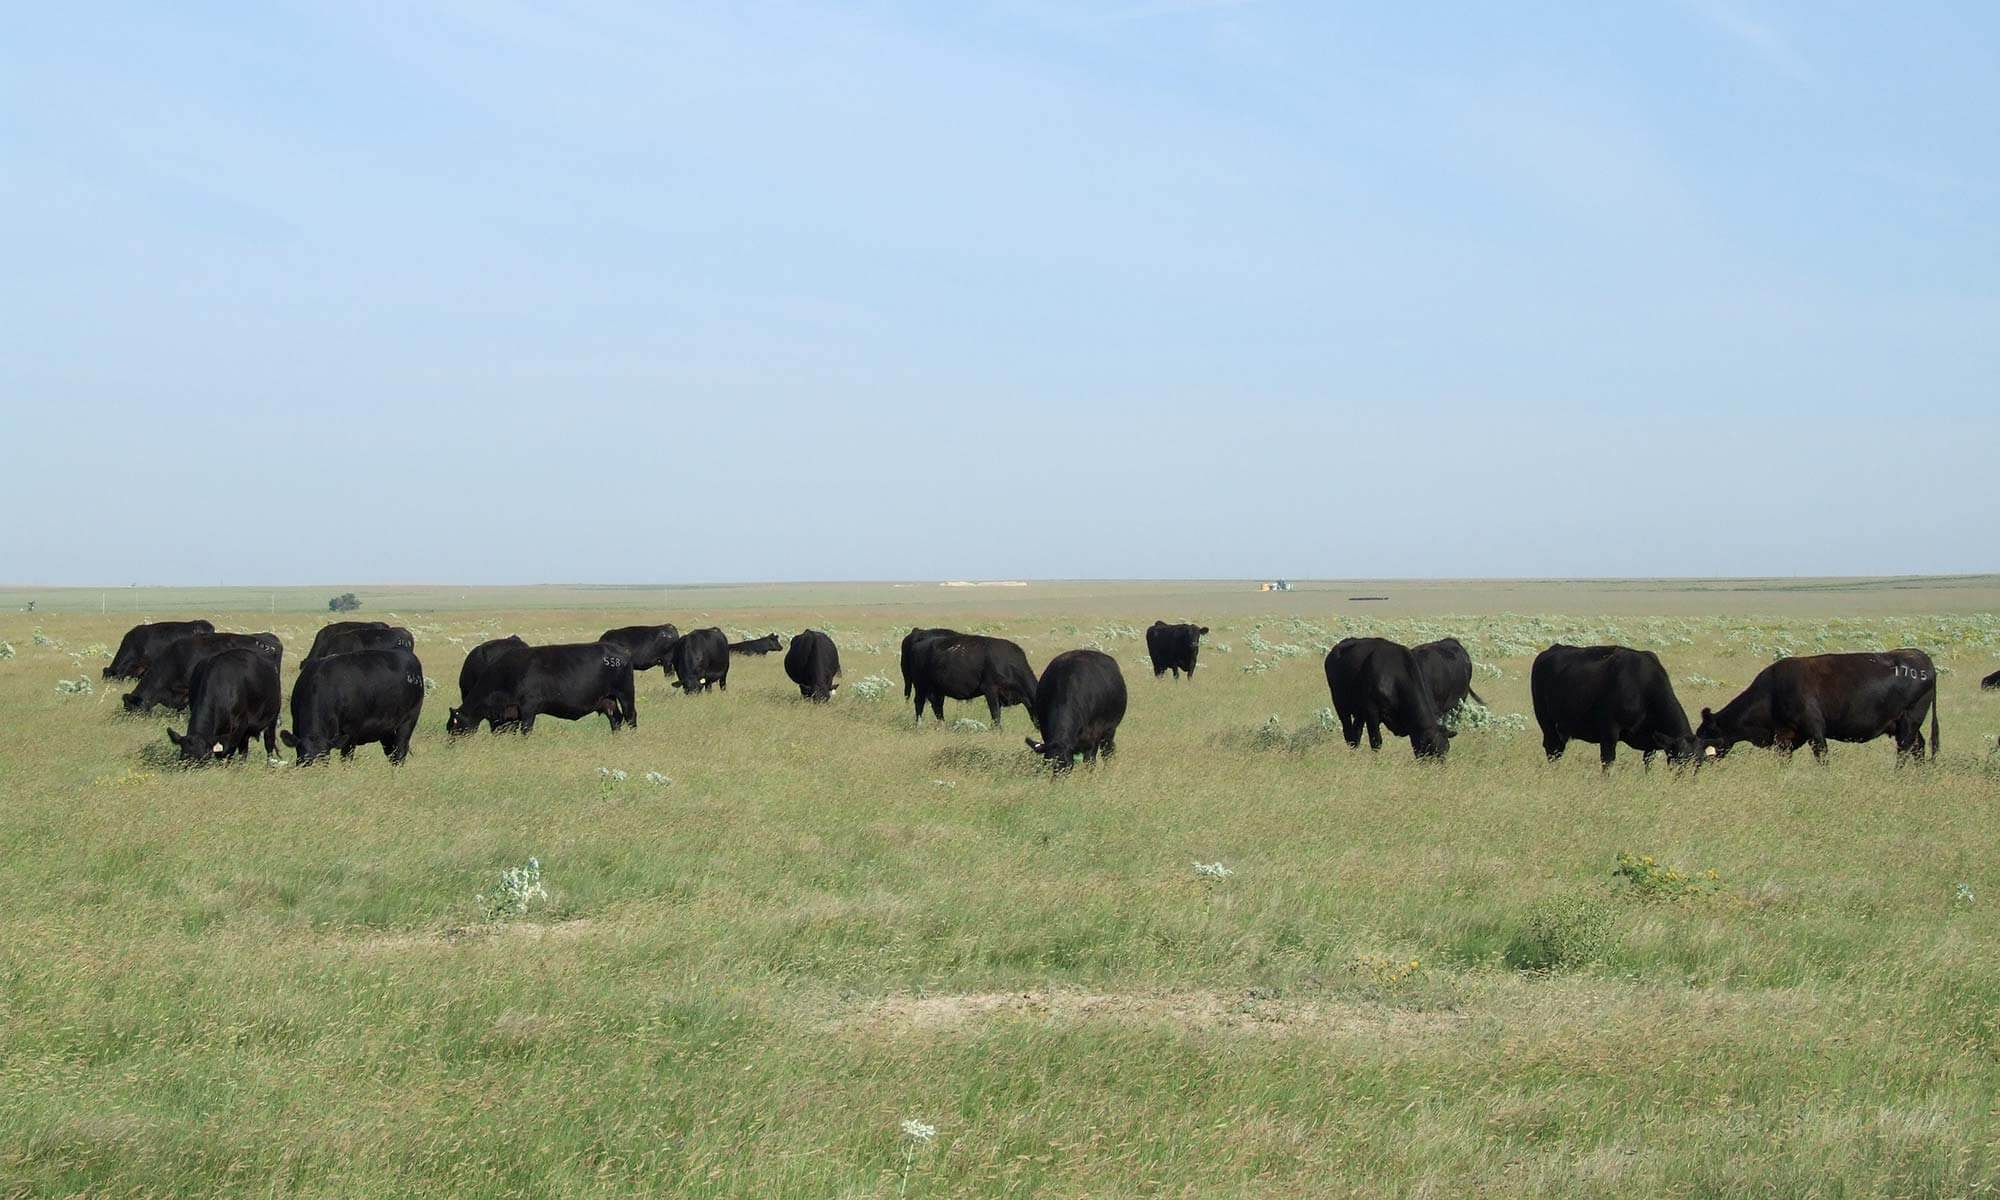 Cows in pasture grazing